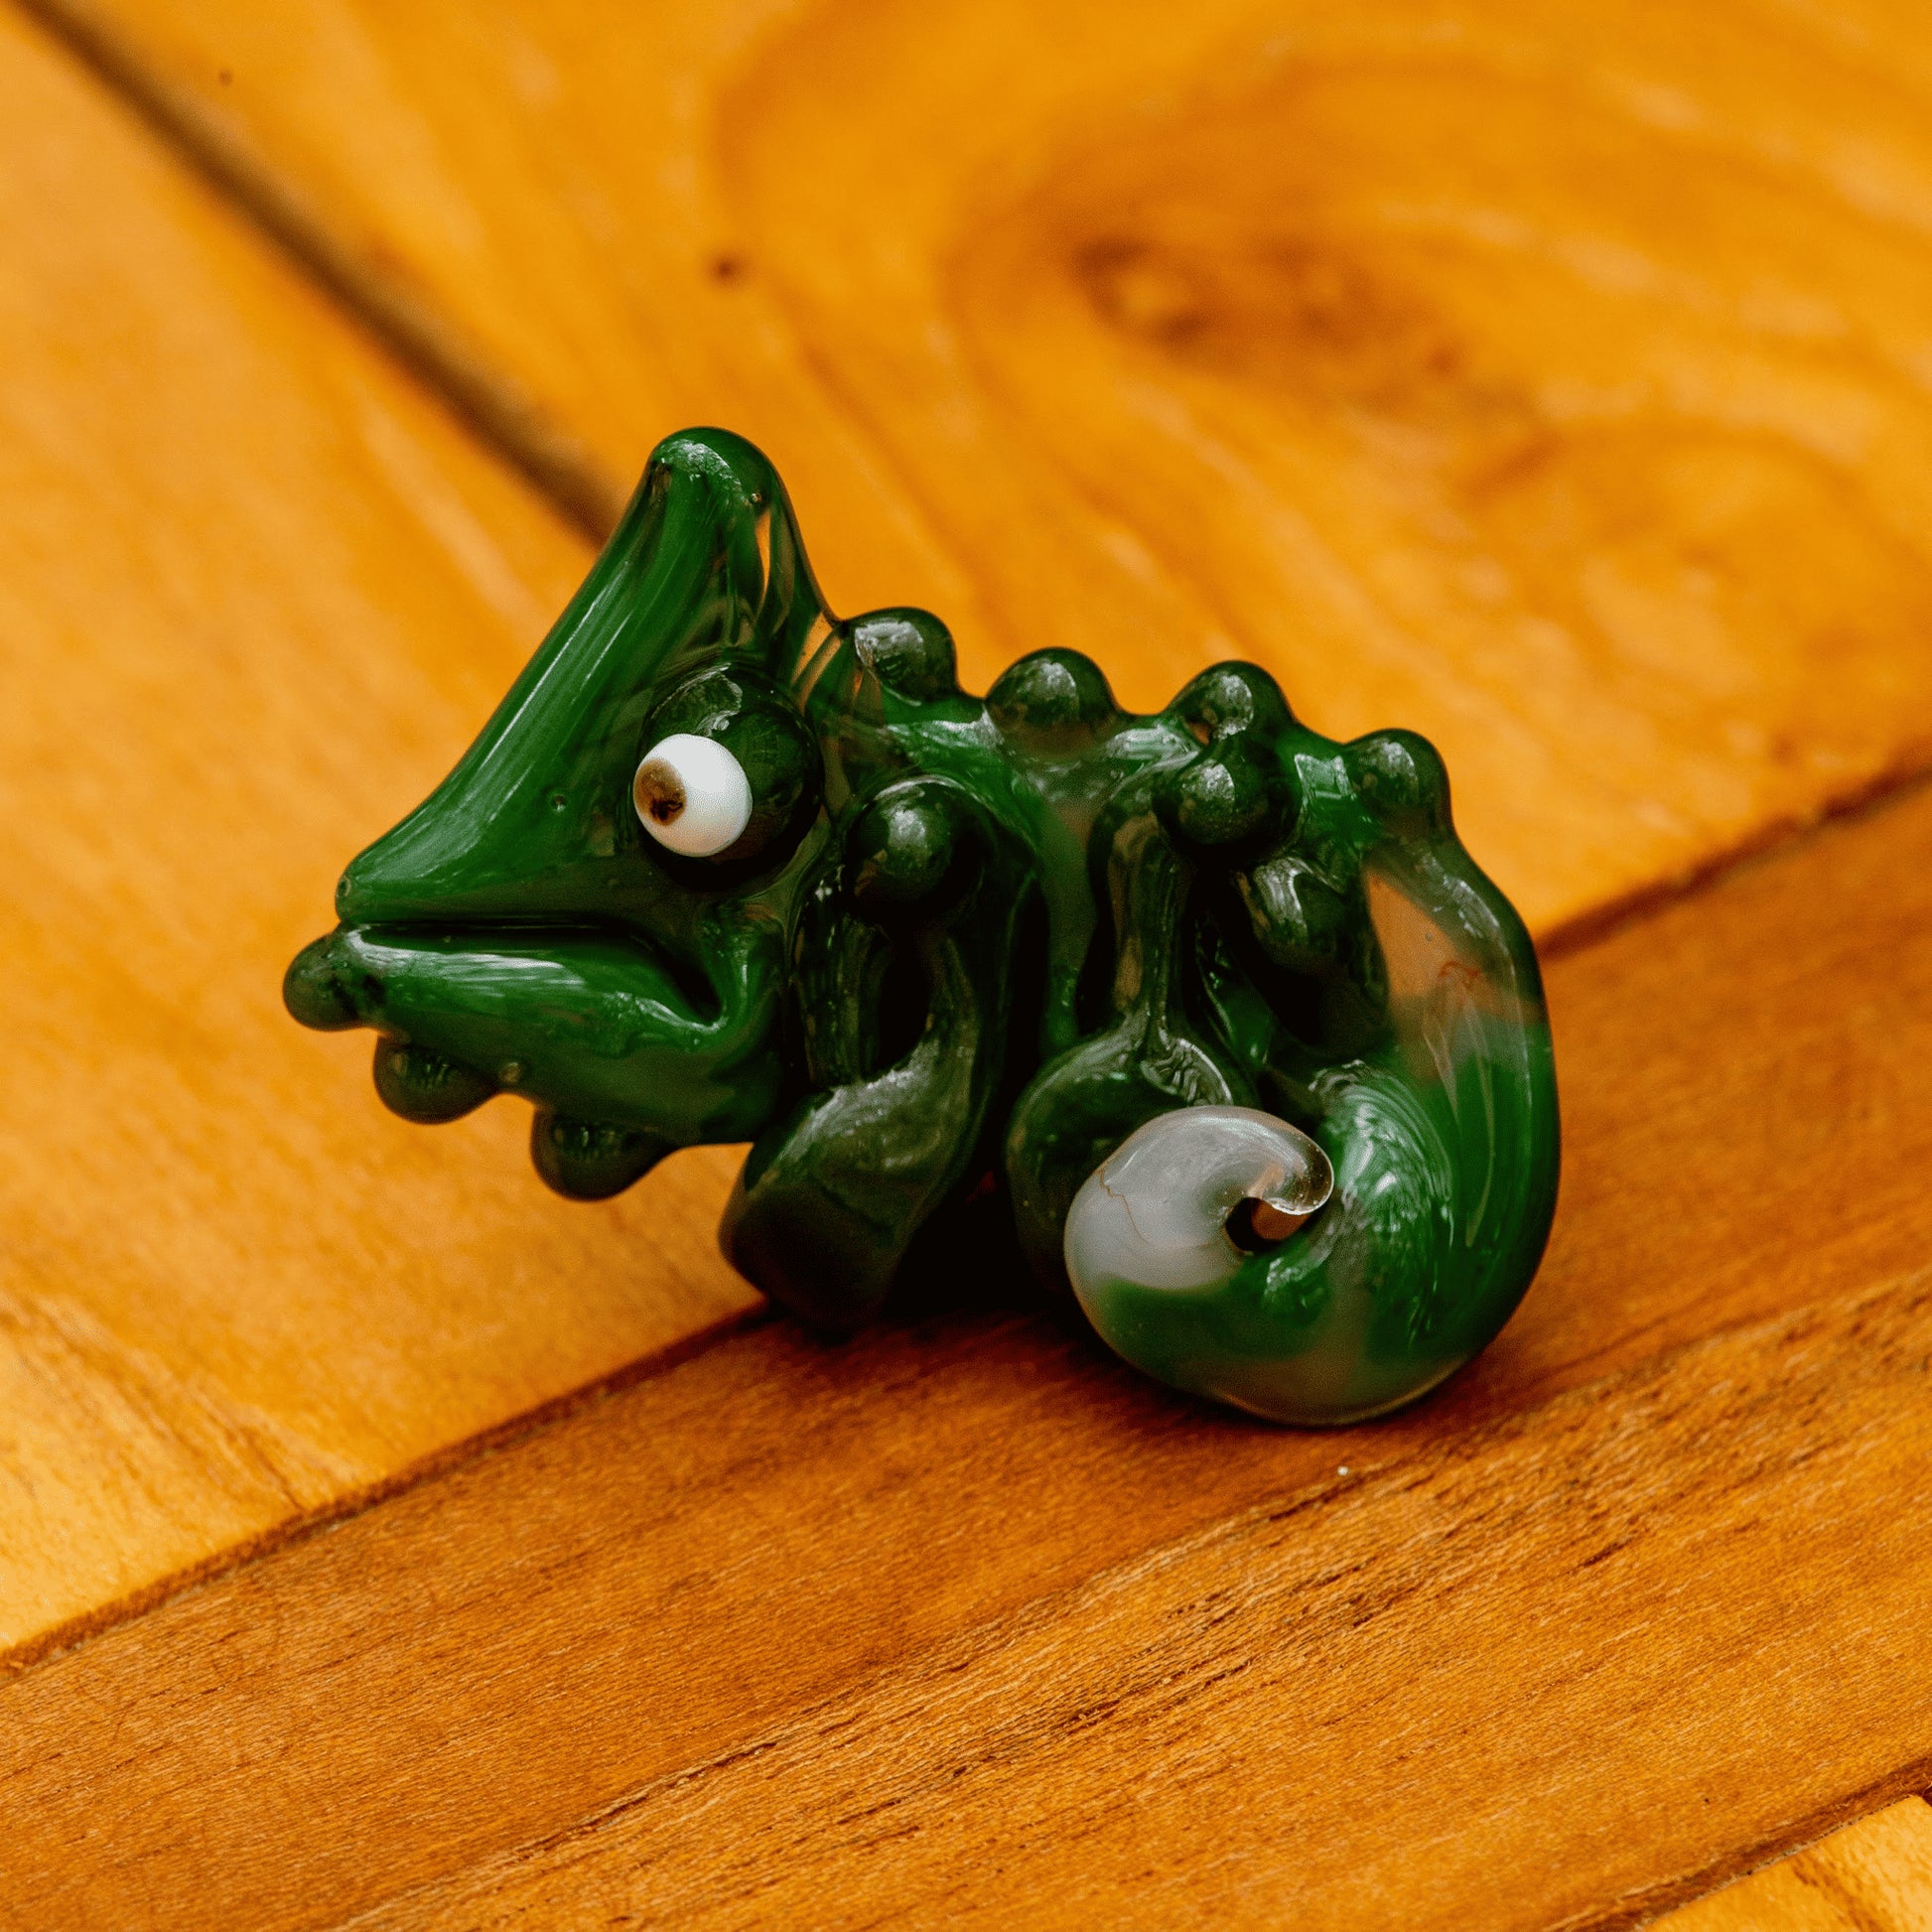 luxurious glass pendant - Chameleon Pendant (F) by Willy That Glass Guy